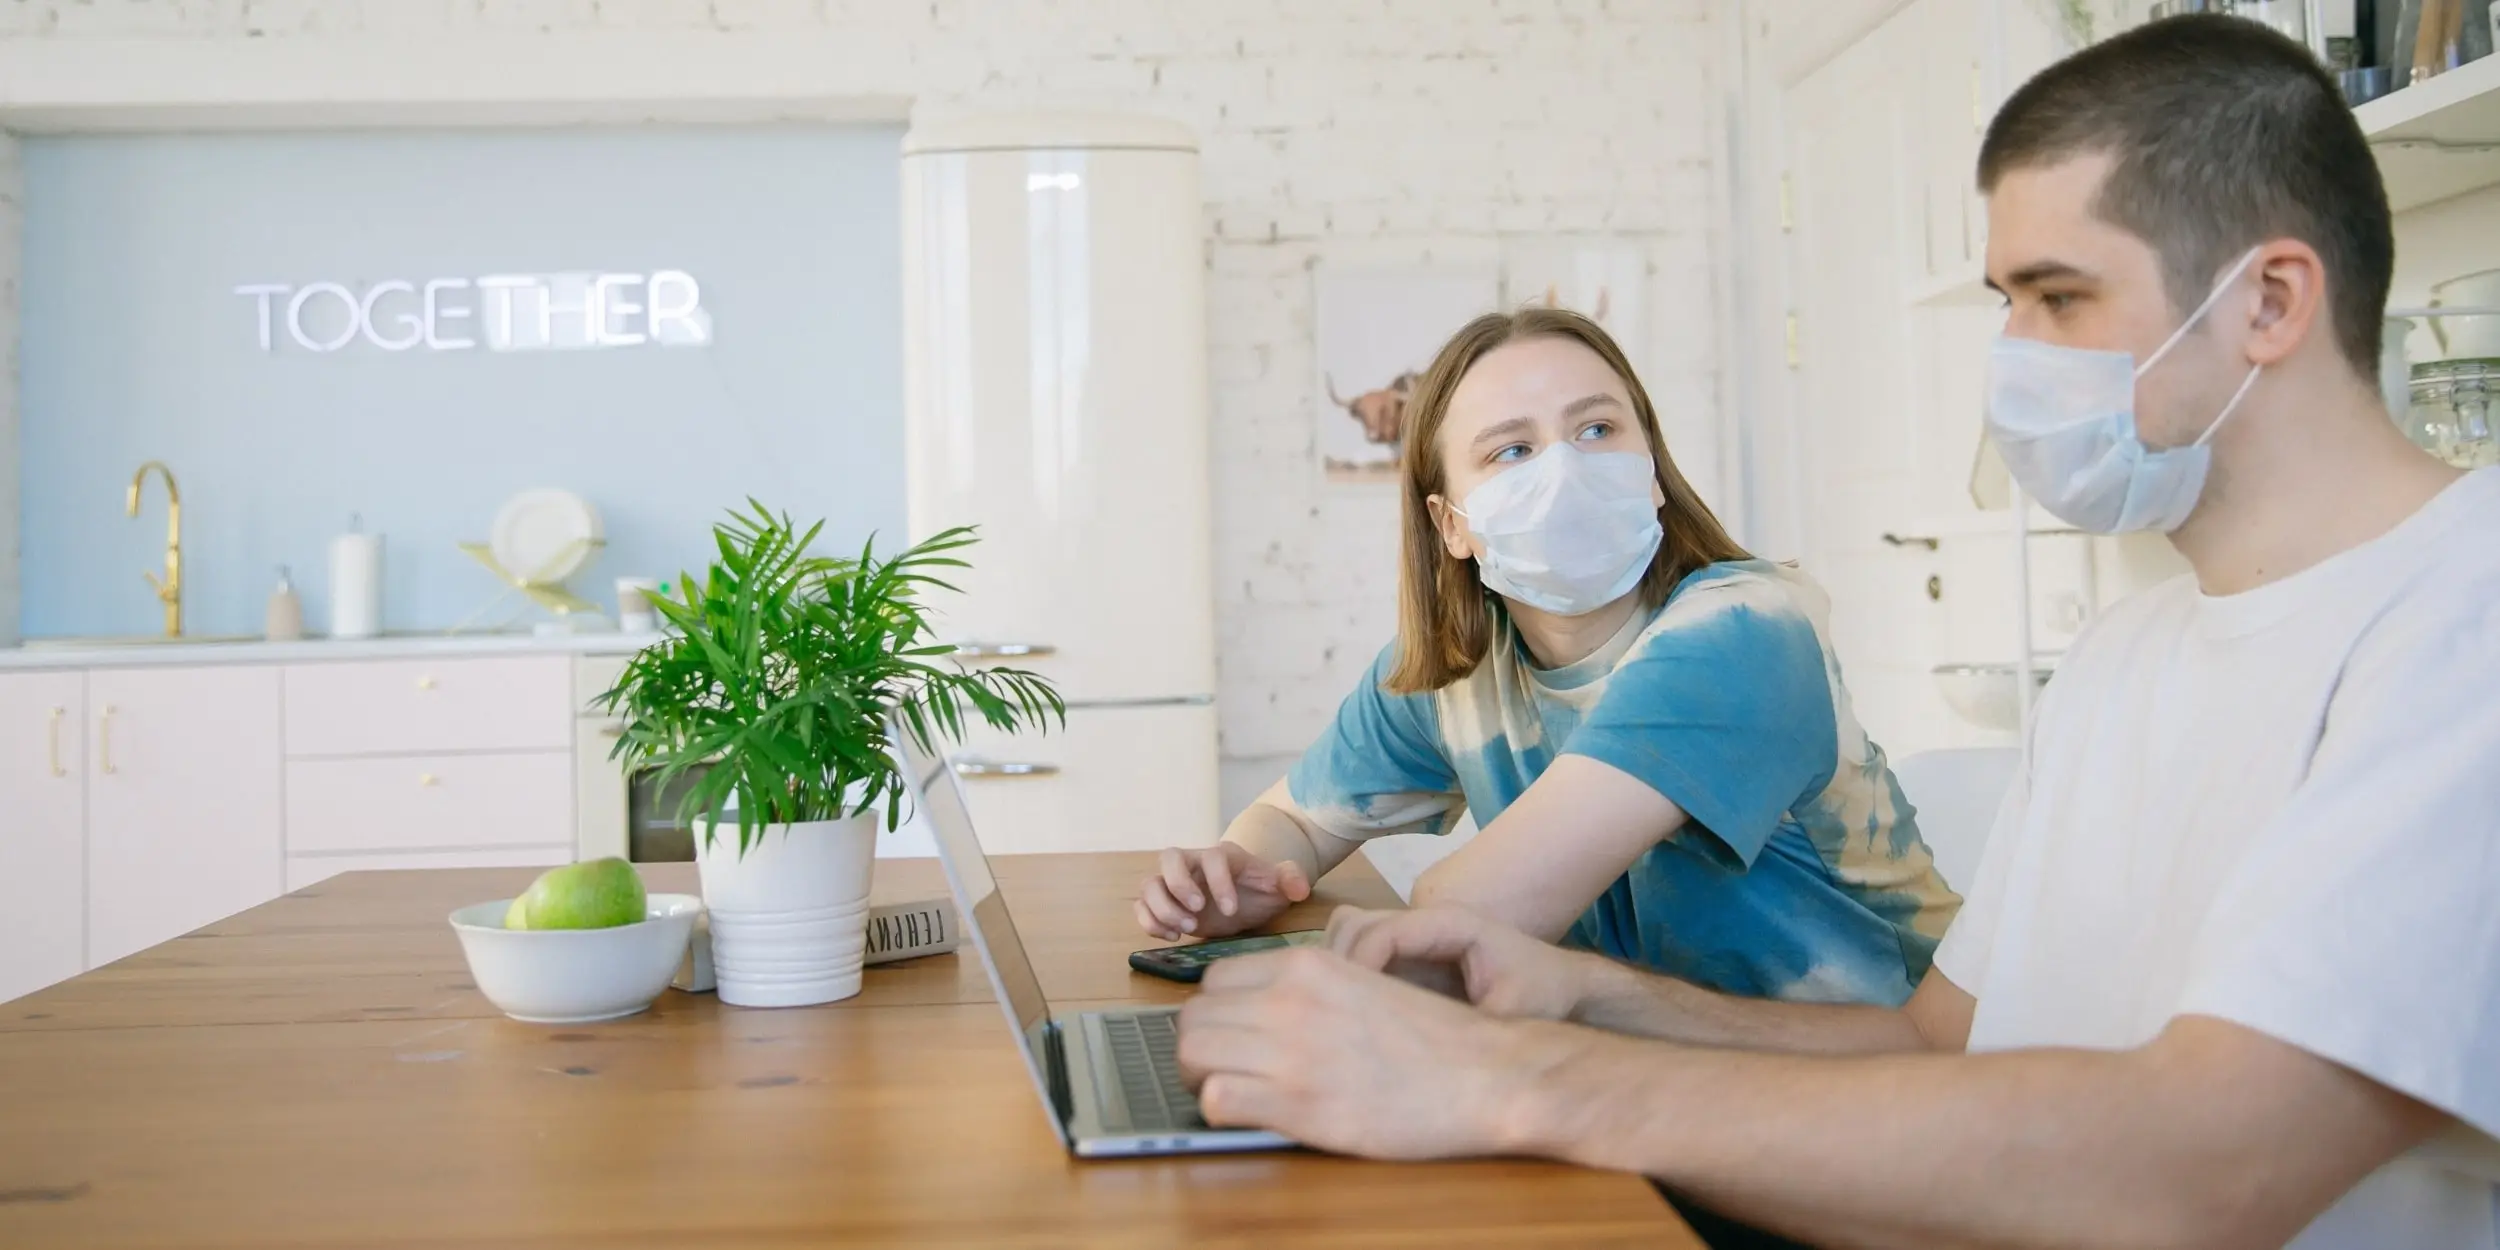 The effects of the COVID-19 pandemic on coworking